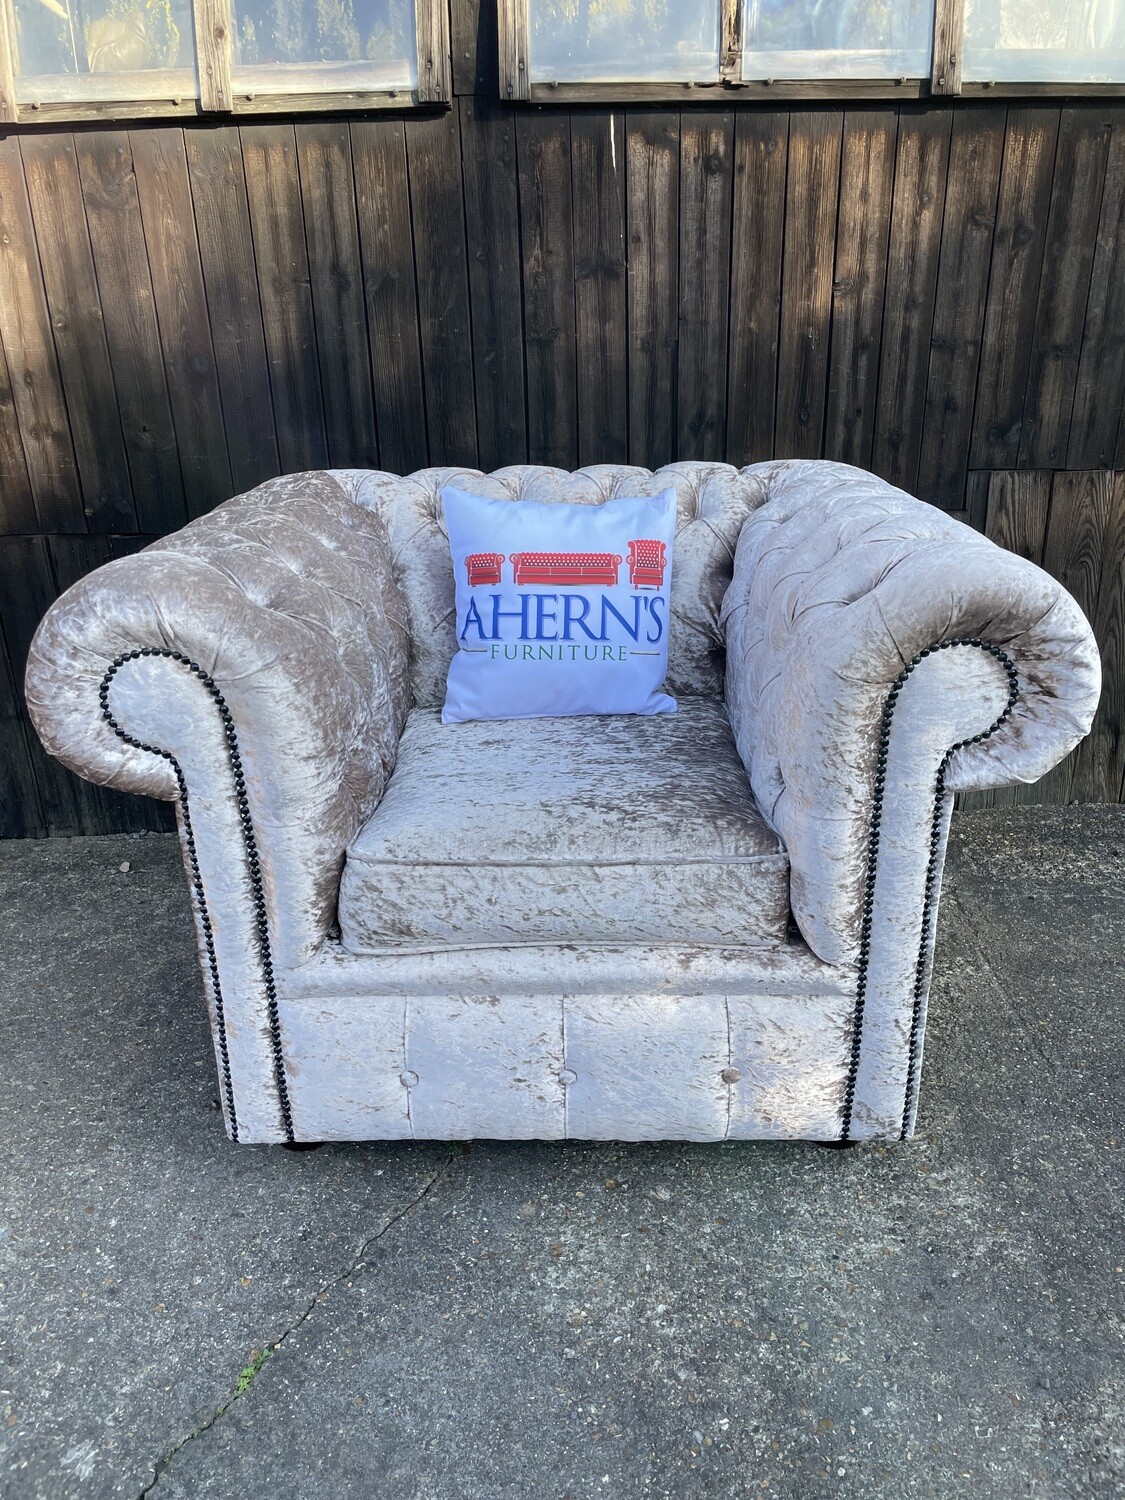 *Silver Crushed Velvet Chesterfield Club Chair FREE DELIVERY 🚚*